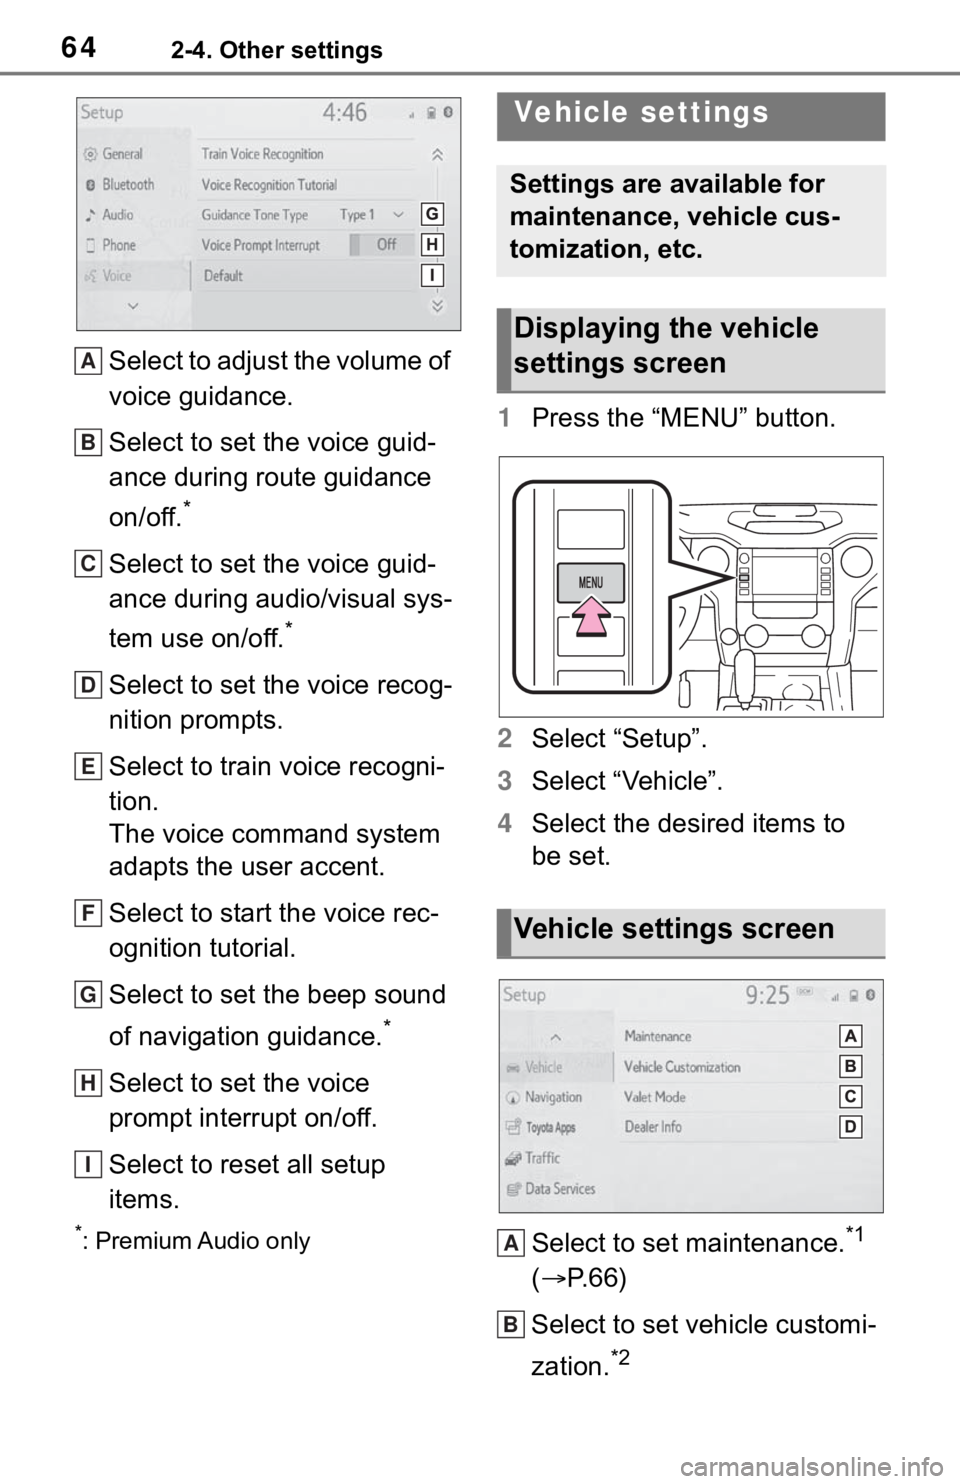 TOYOTA TUNDRA 2020  Accessories, Audio & Navigation (in English) 642-4. Other settings
Select to adjust the volume of 
voice guidance.
Select to set the voice guid-
ance during route guidance 
on/off.
*
Select to set the voice guid-
ance during audio/visual sys-
te